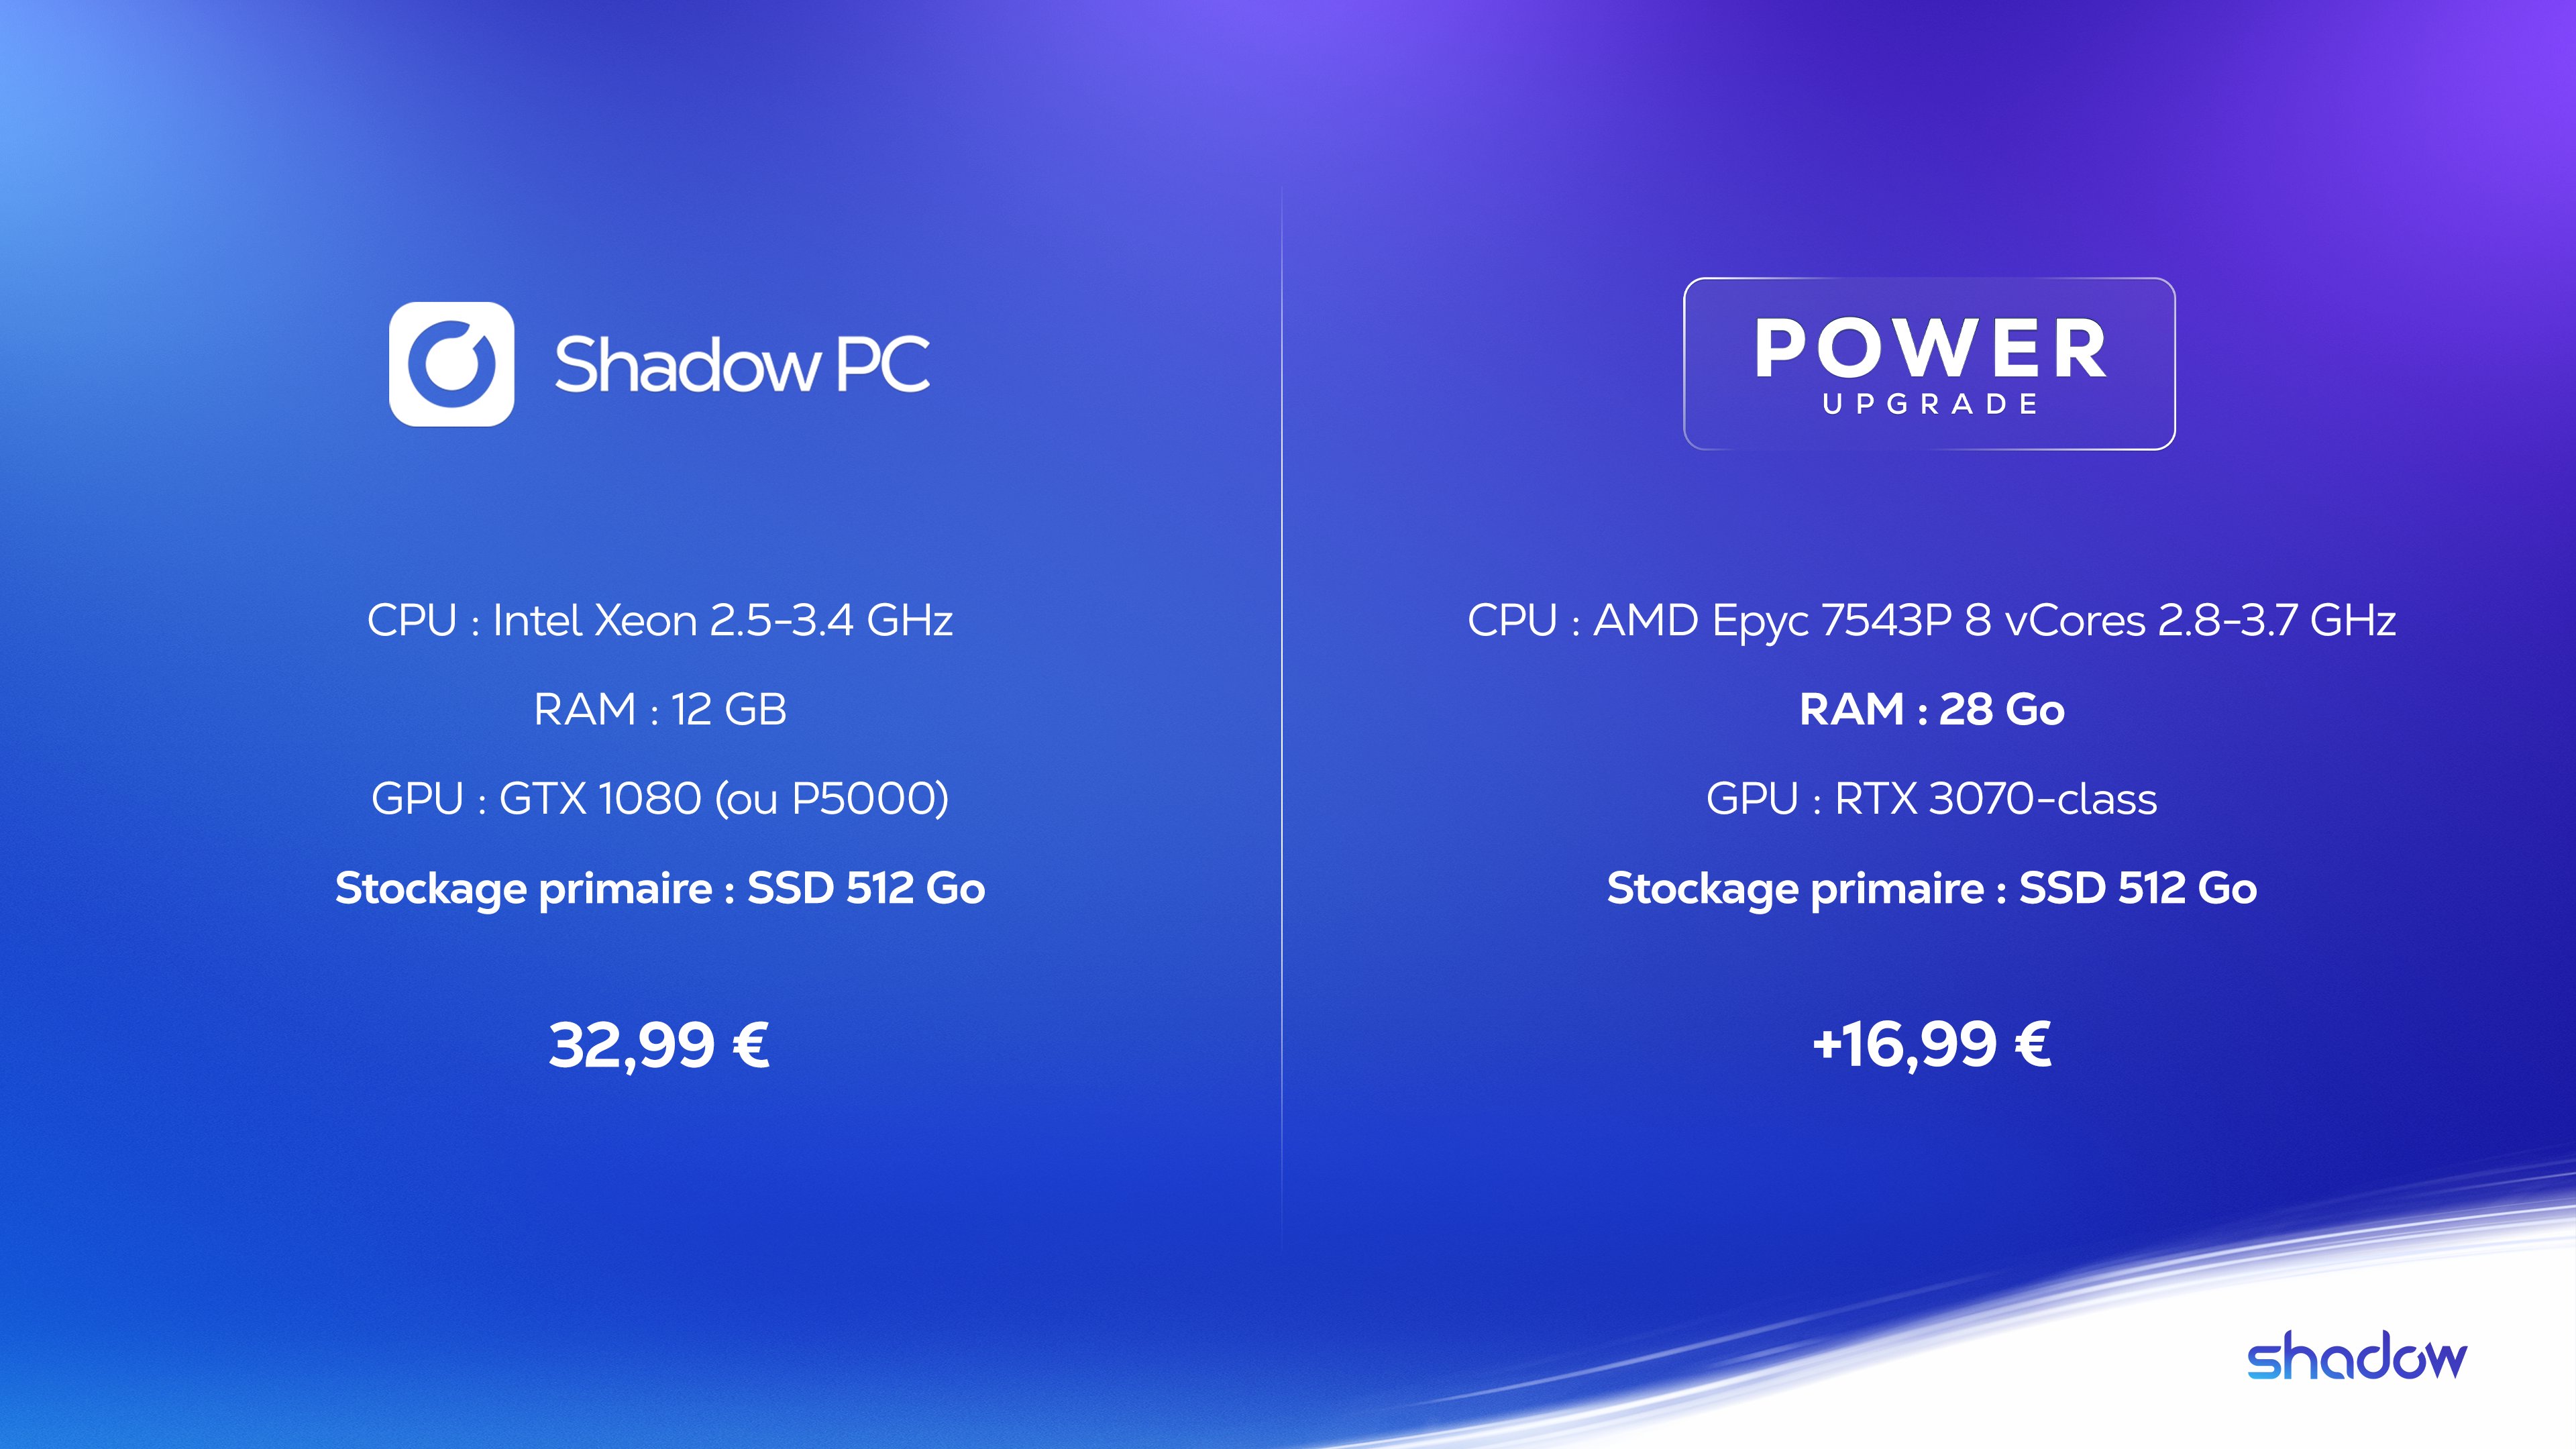 Shadow on X: "New Shadow PC and Power Upgrade offers: more power and more  storage -Main storage increased to 512 GB -Power Upgrade expanded from 16 GB  to 28 GB of RAM -